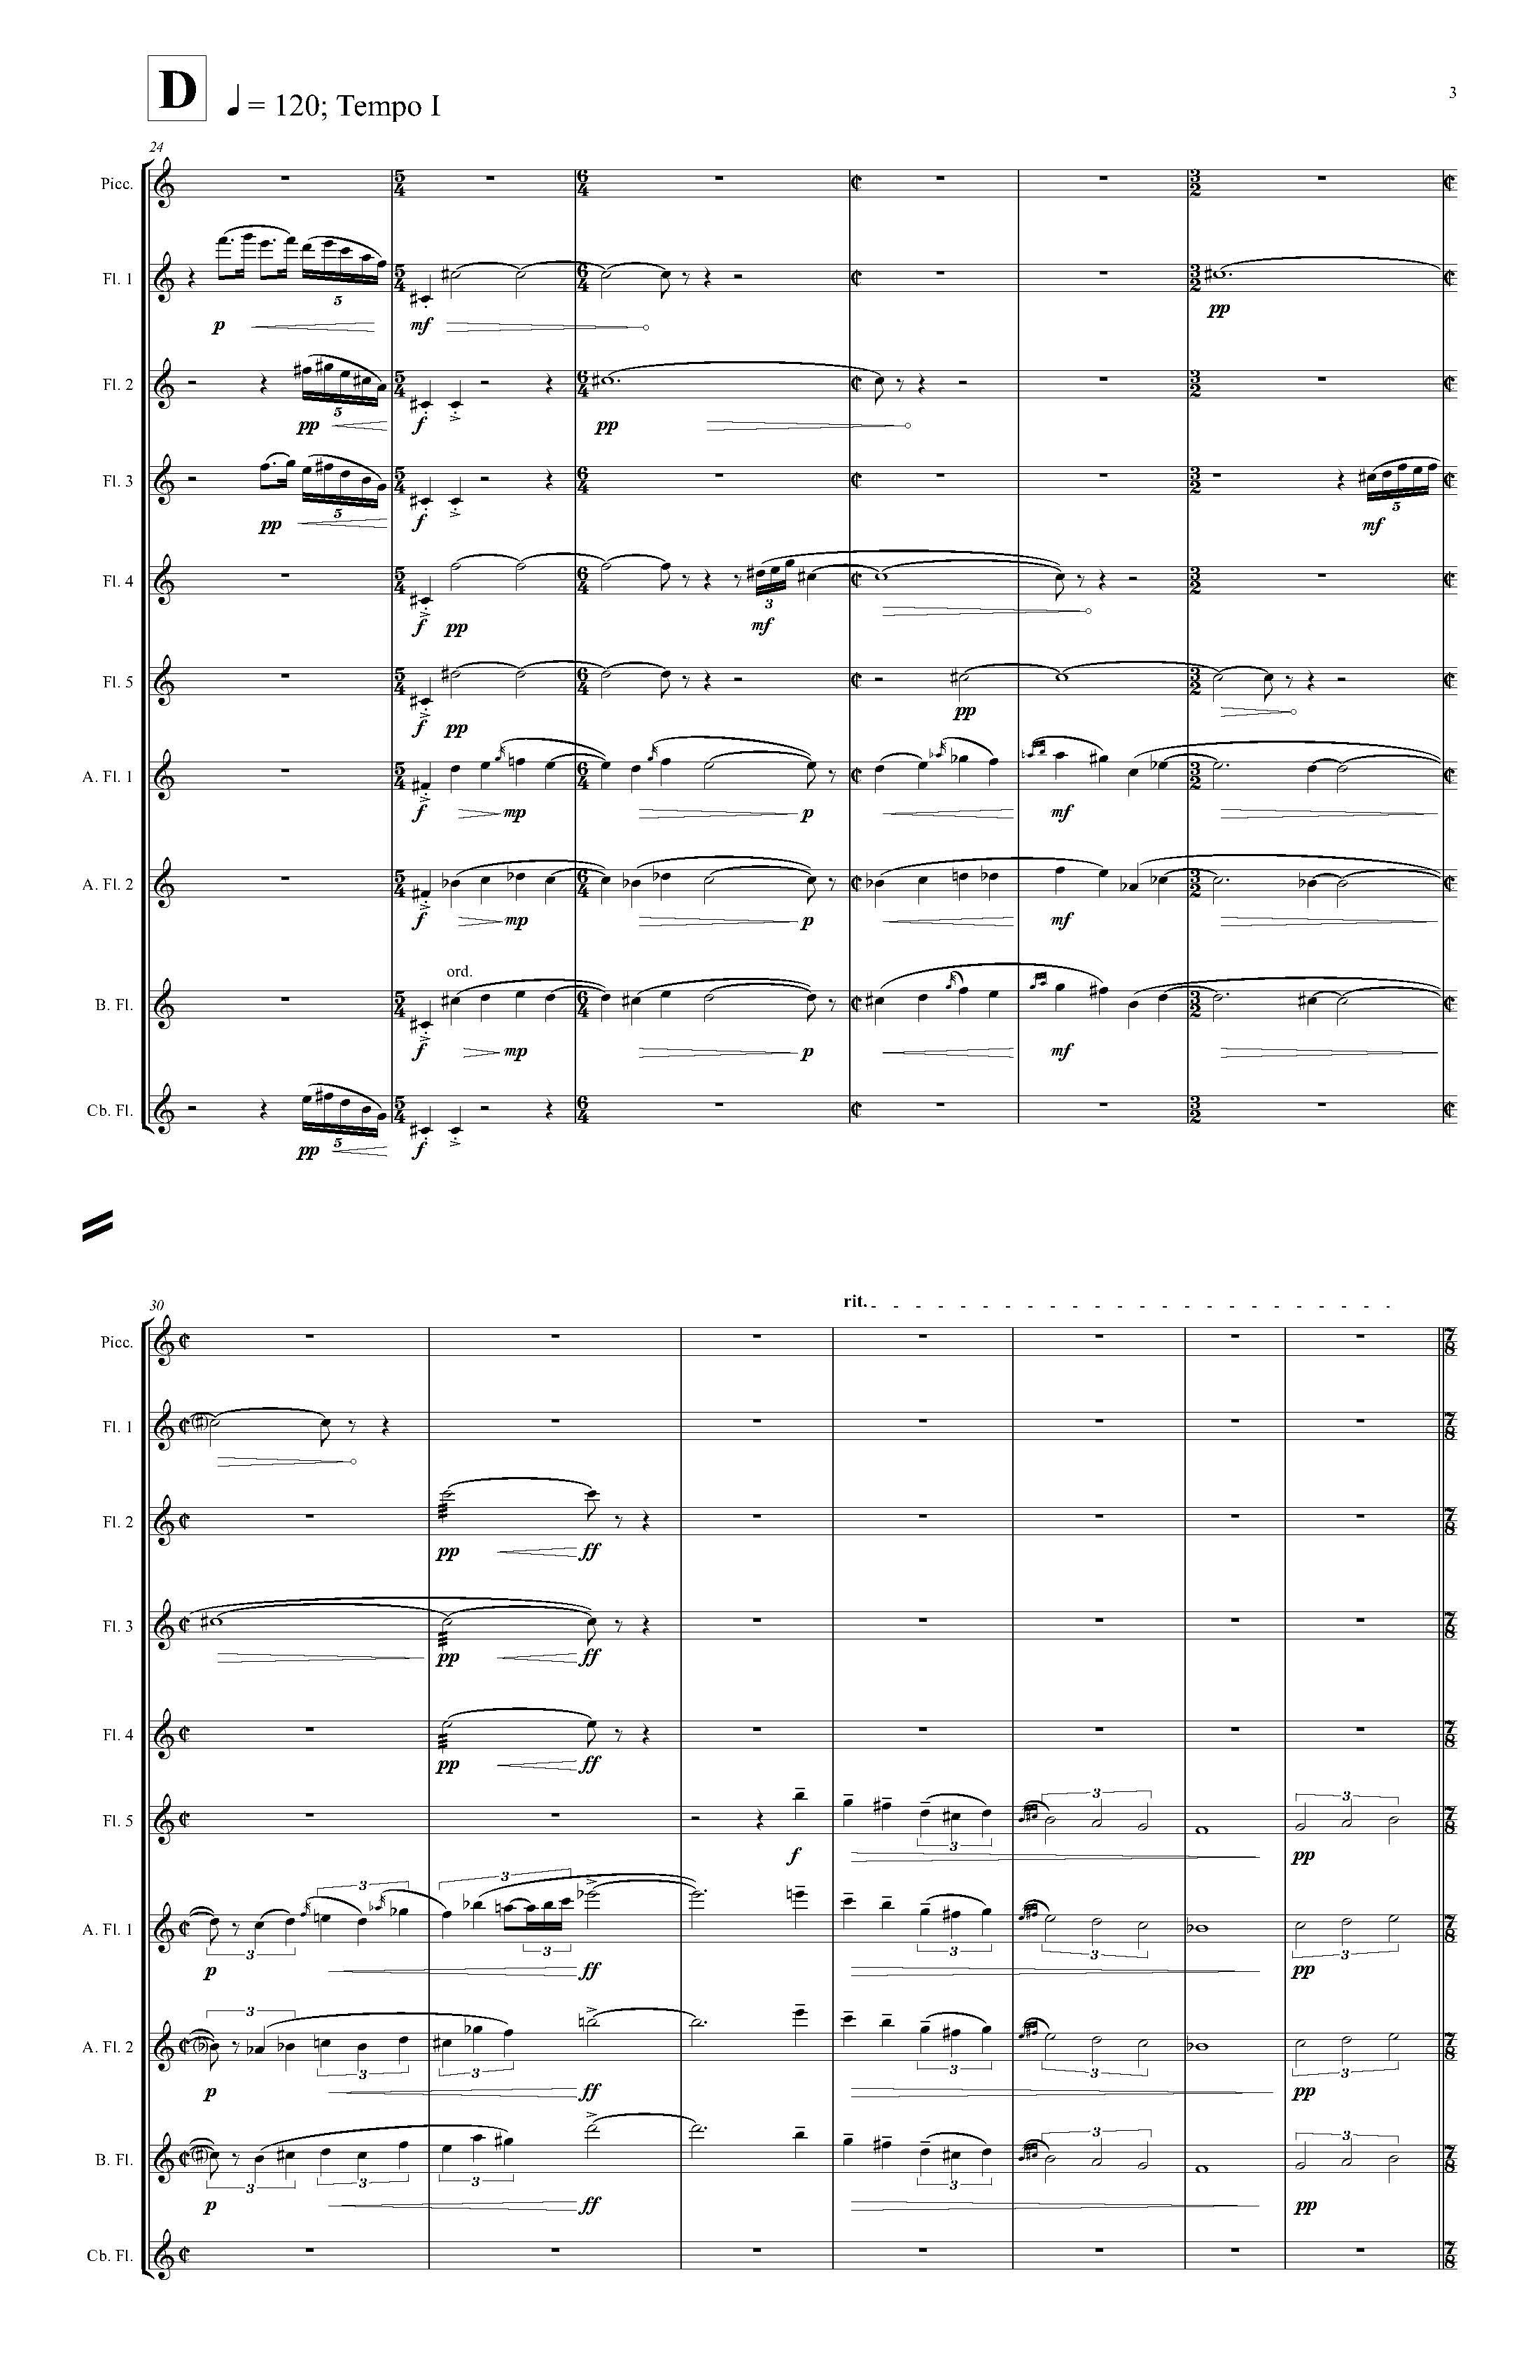 PIPES - Complete Score_Page_09.jpg